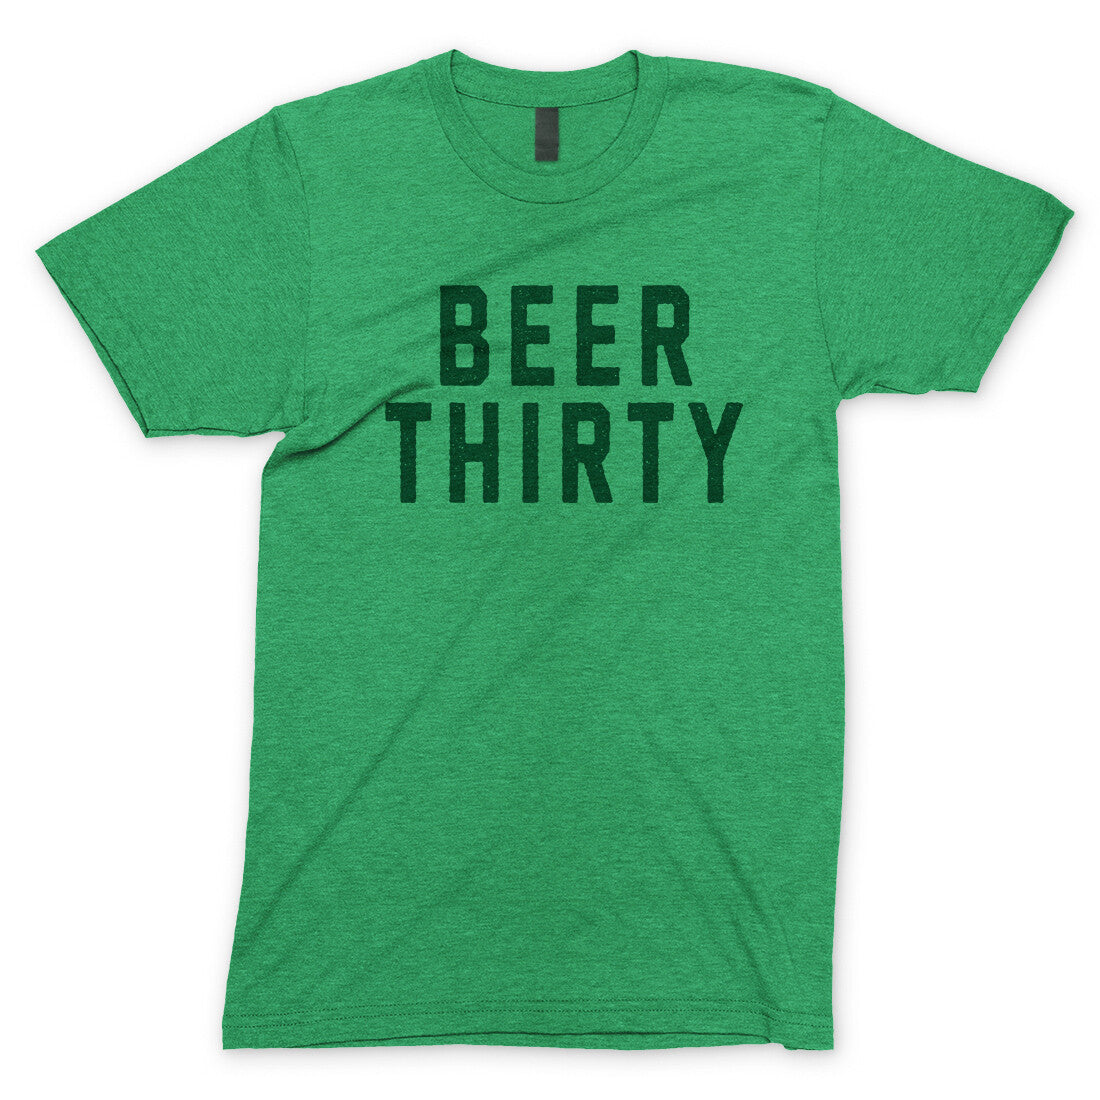 Beer Thirty in Heather Irish Green Color